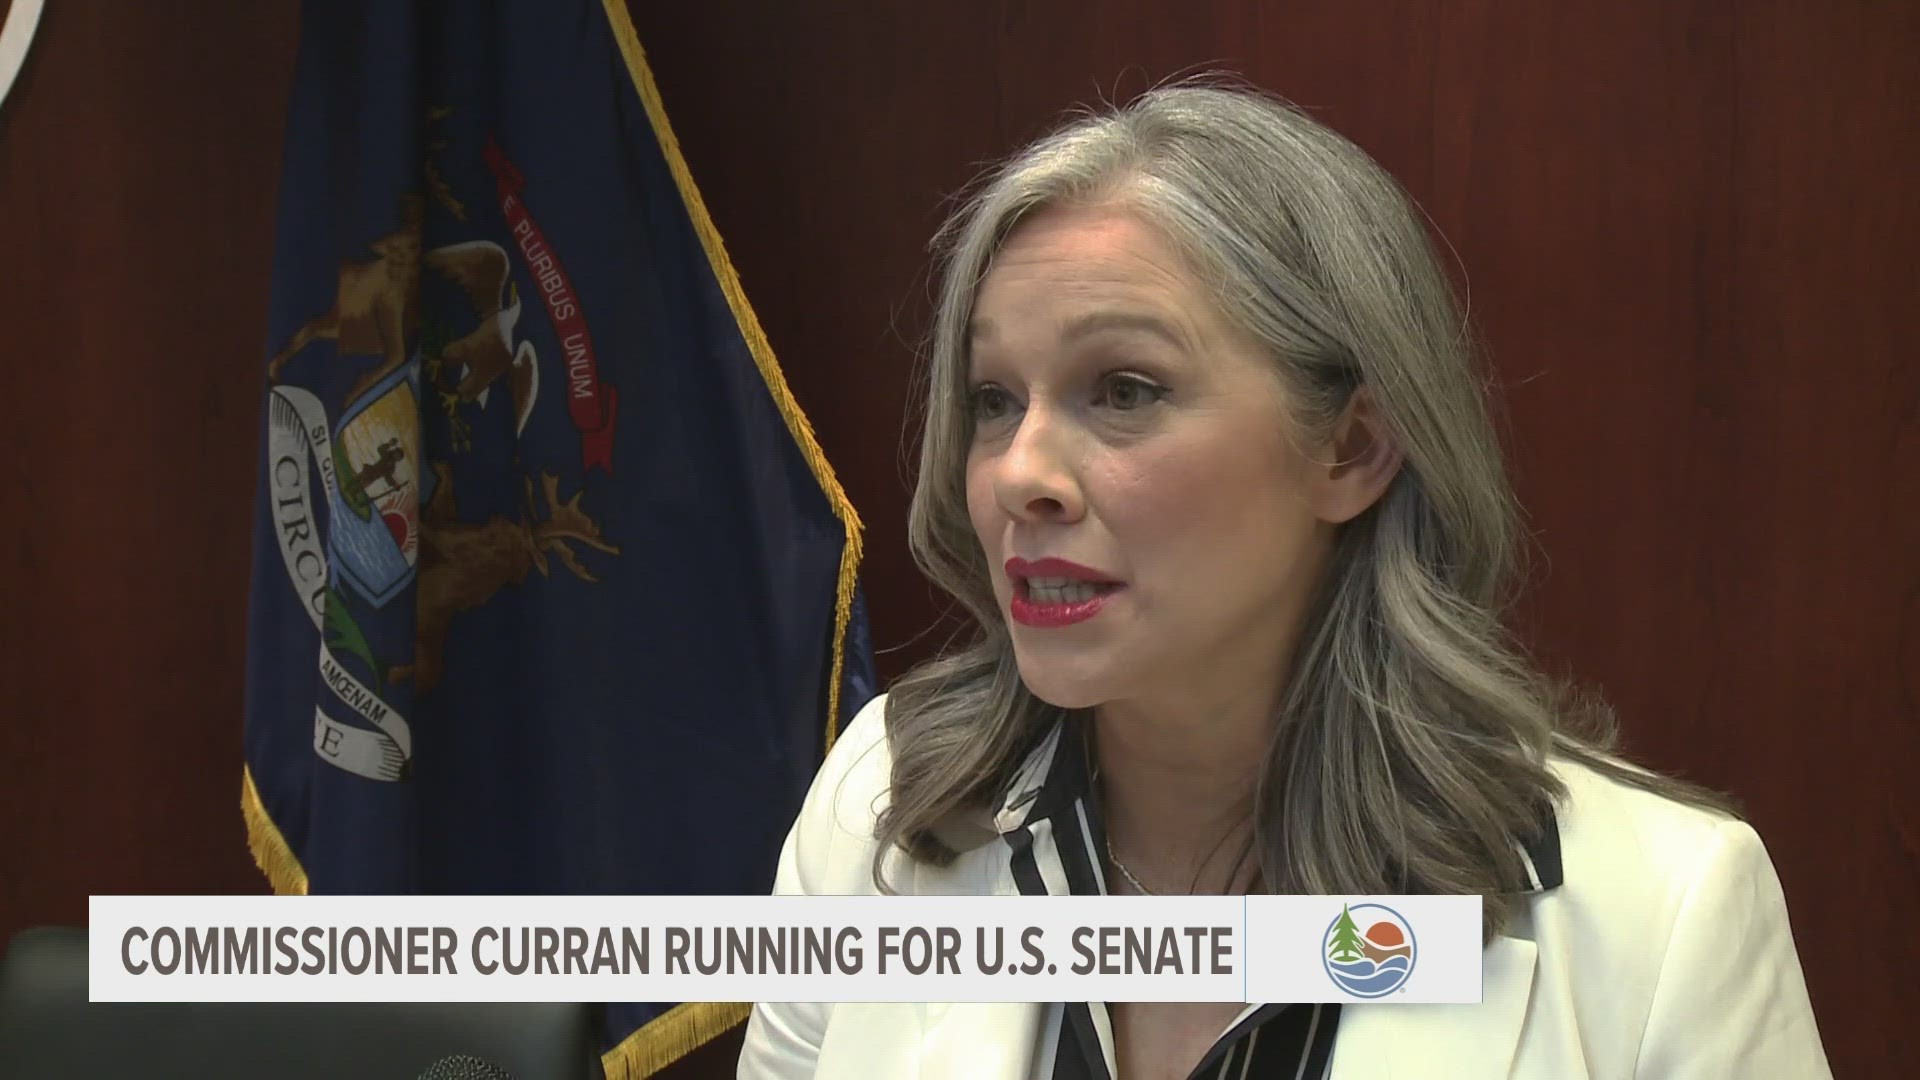 Commissioner Rebekah Curran joins a crowded field of Republican candidates vying for the post, including multiple former members of Congress.